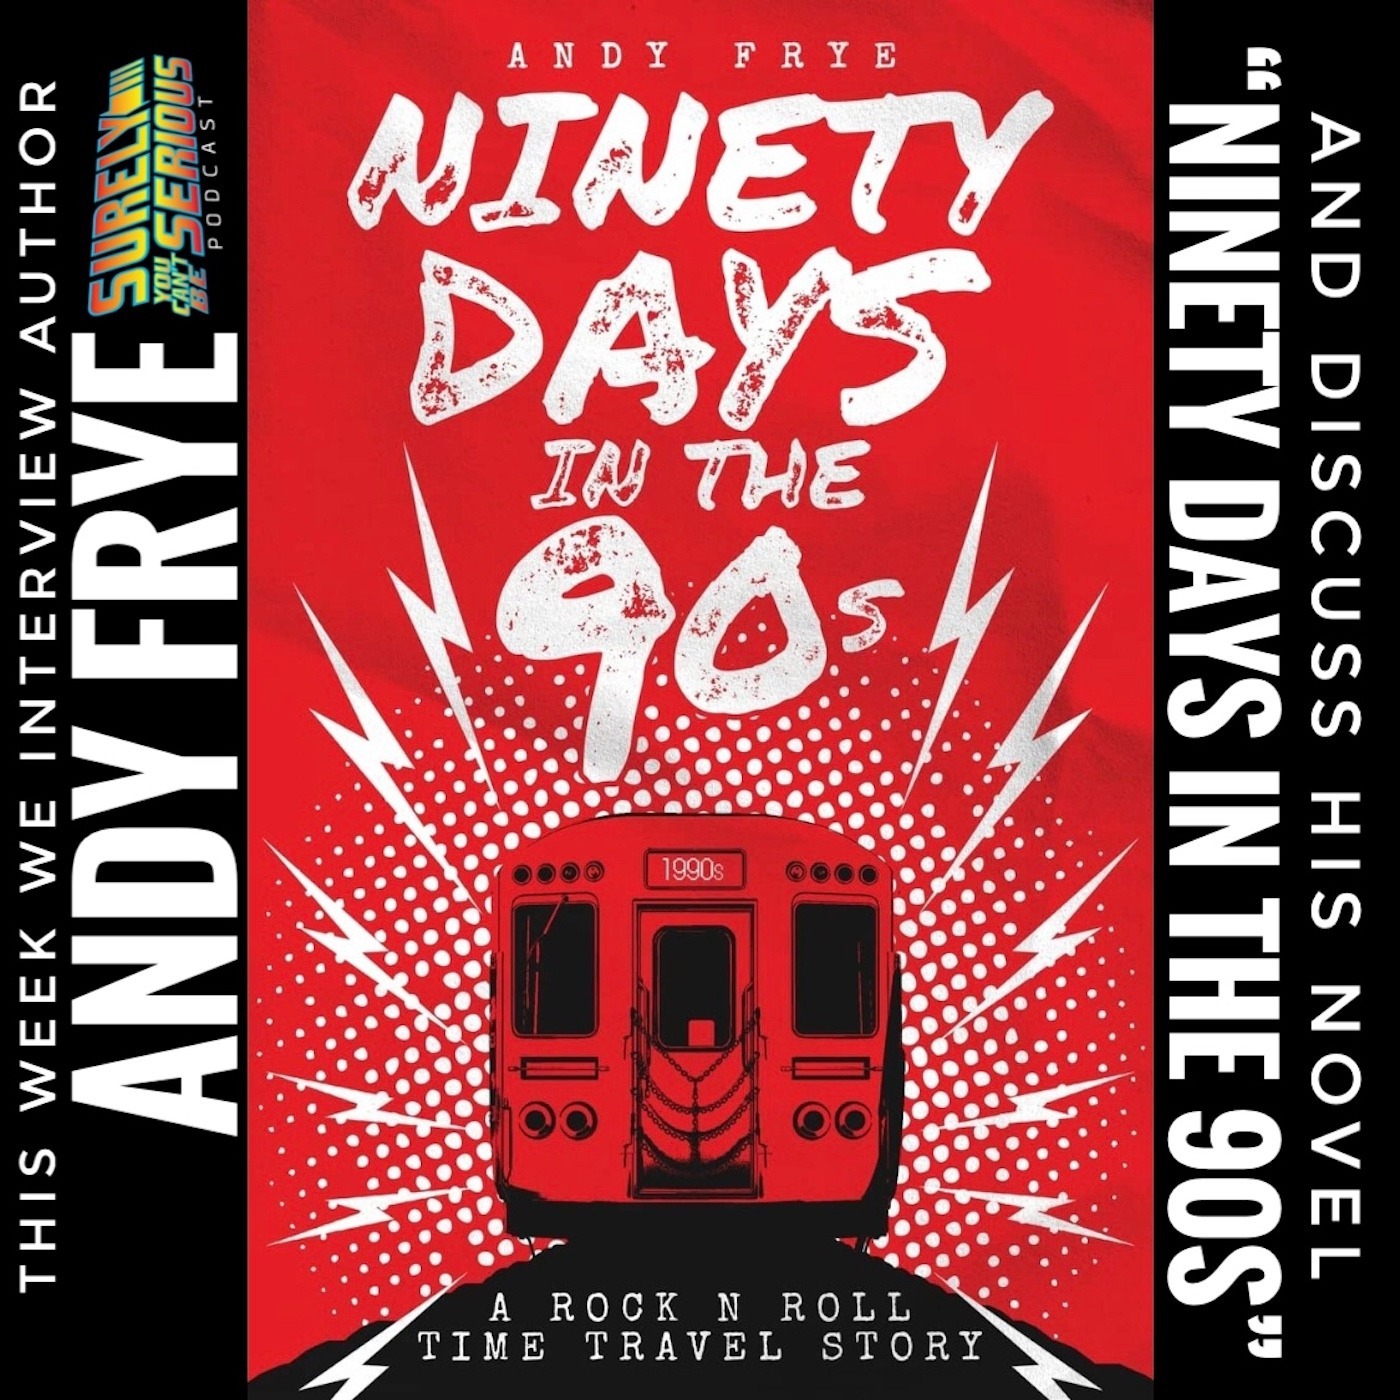 "Ninety Days in the 90s" (2022) with Andy Frye Image